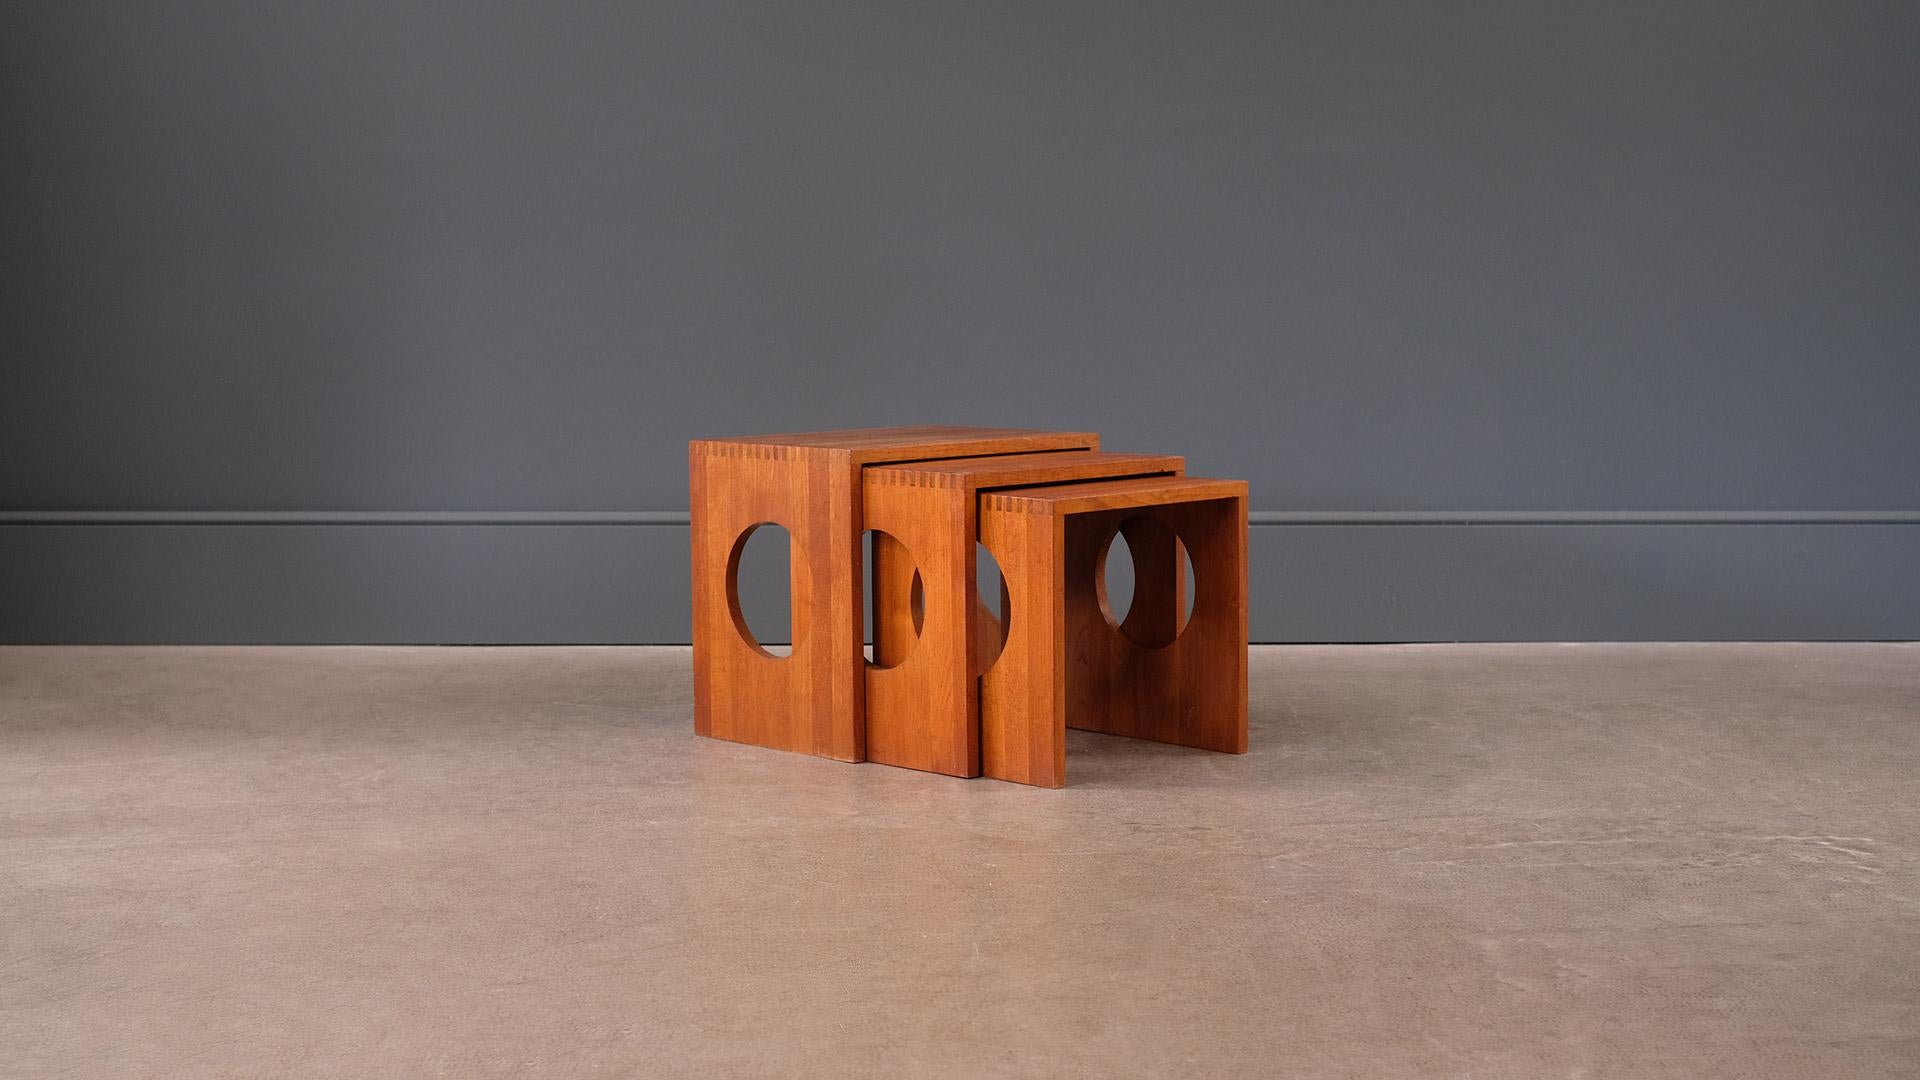 Super rare set of very sought after nesting tables designed by Jens Quistgaard for Nissen, Denmark. Beautifully made in solid Burmese teak with feature exposed joint details. Wonderful set.